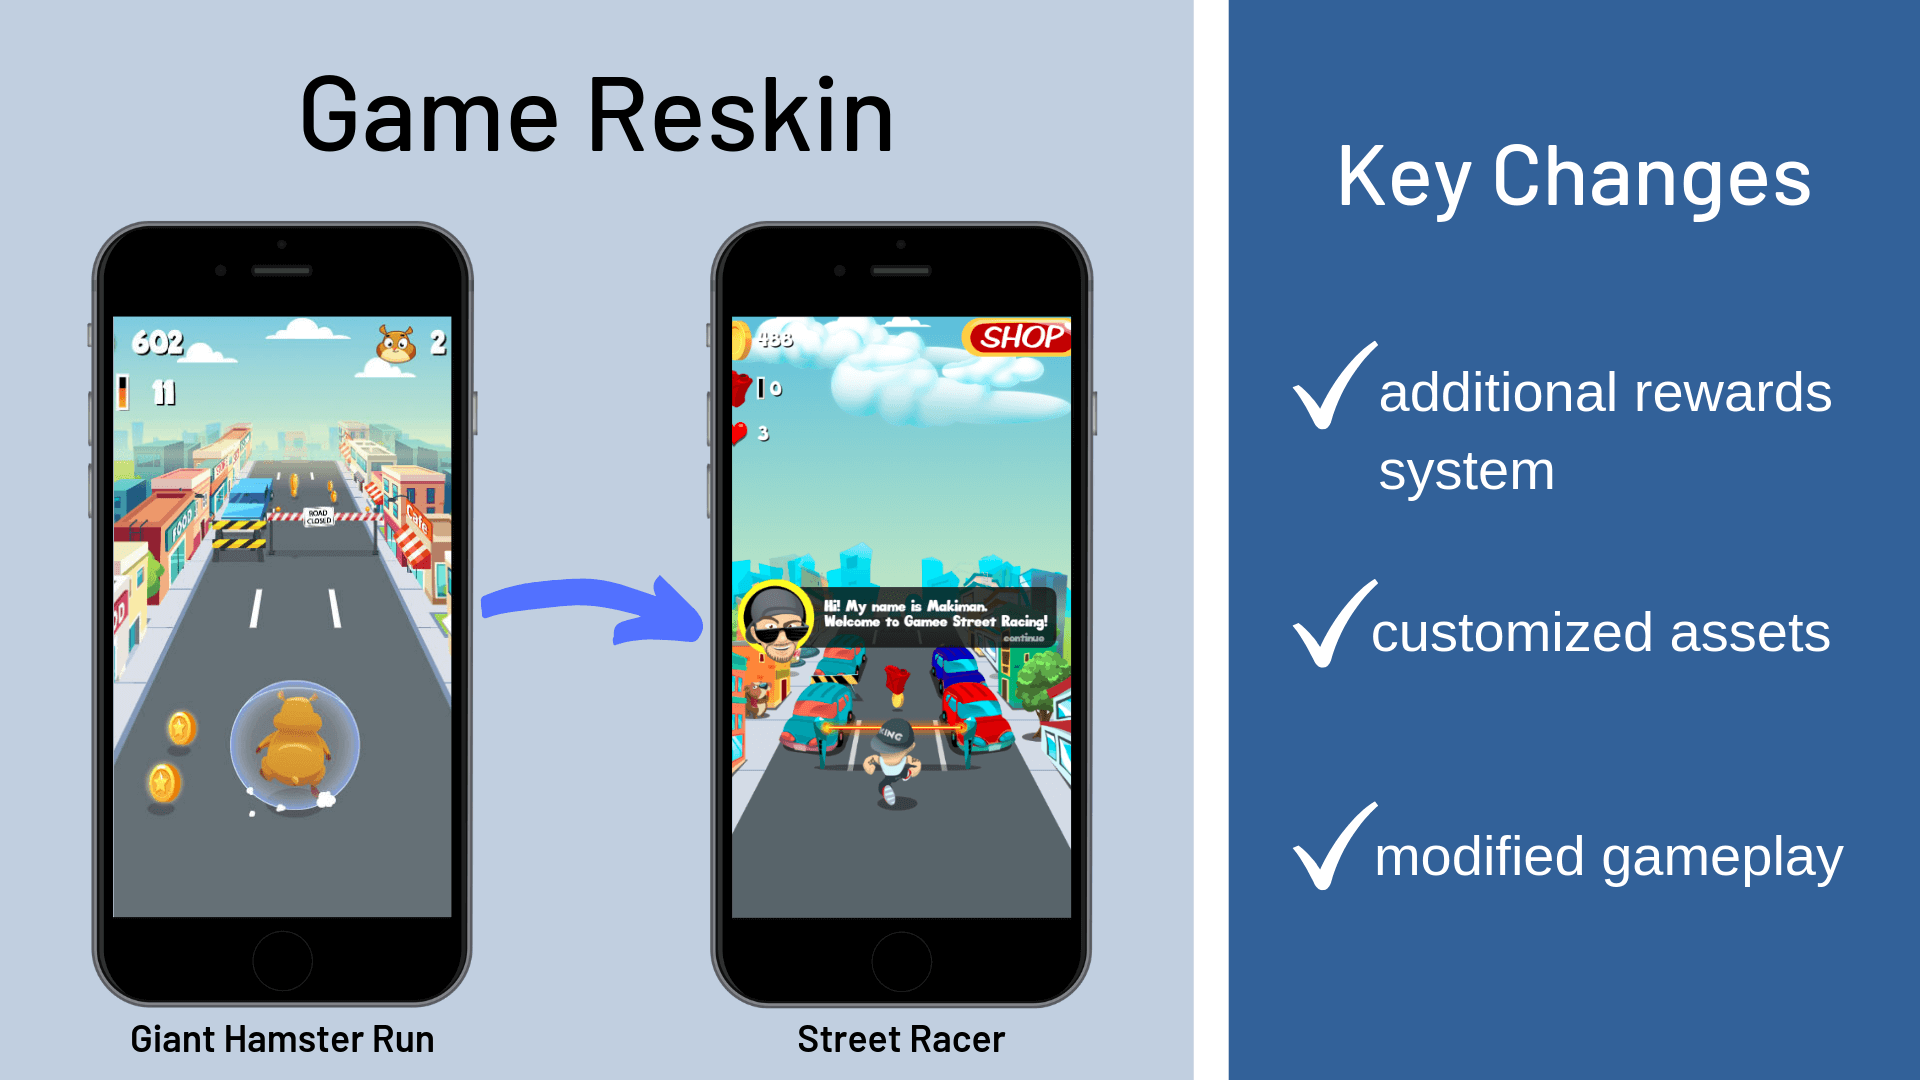 Game Reskin With Youtube Influencers